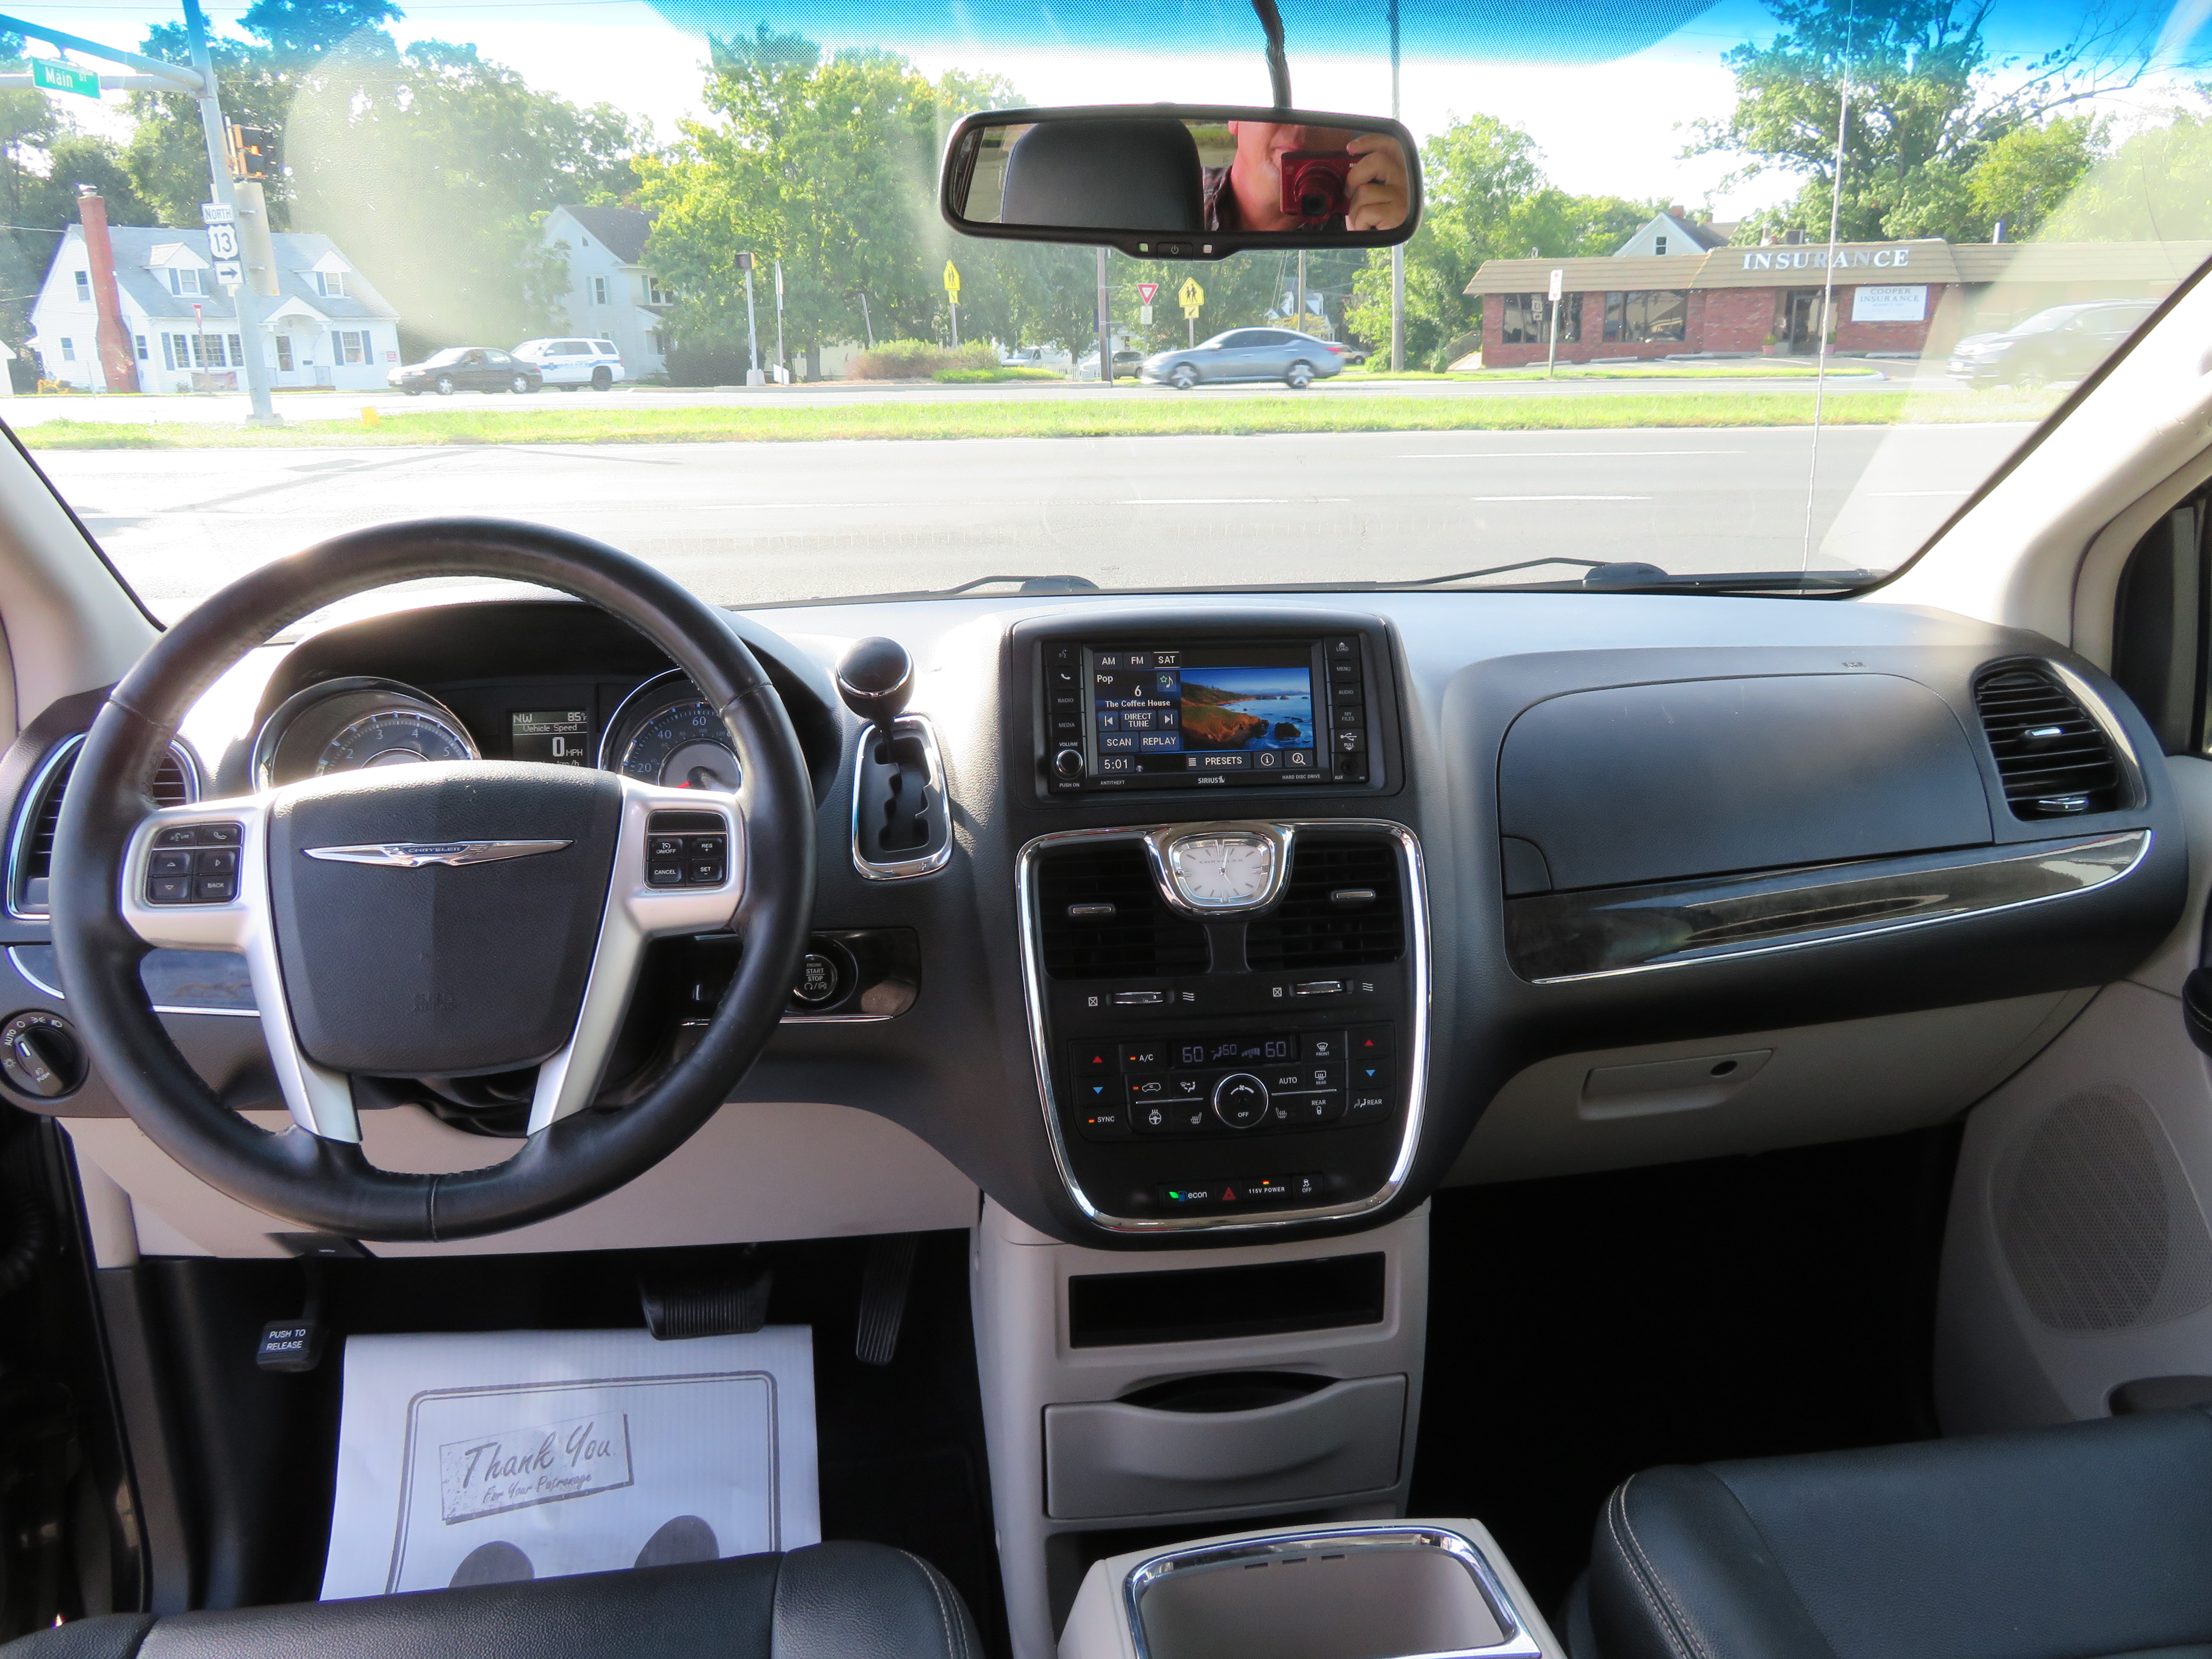 2016 Chrysler Town and Country "Touring"